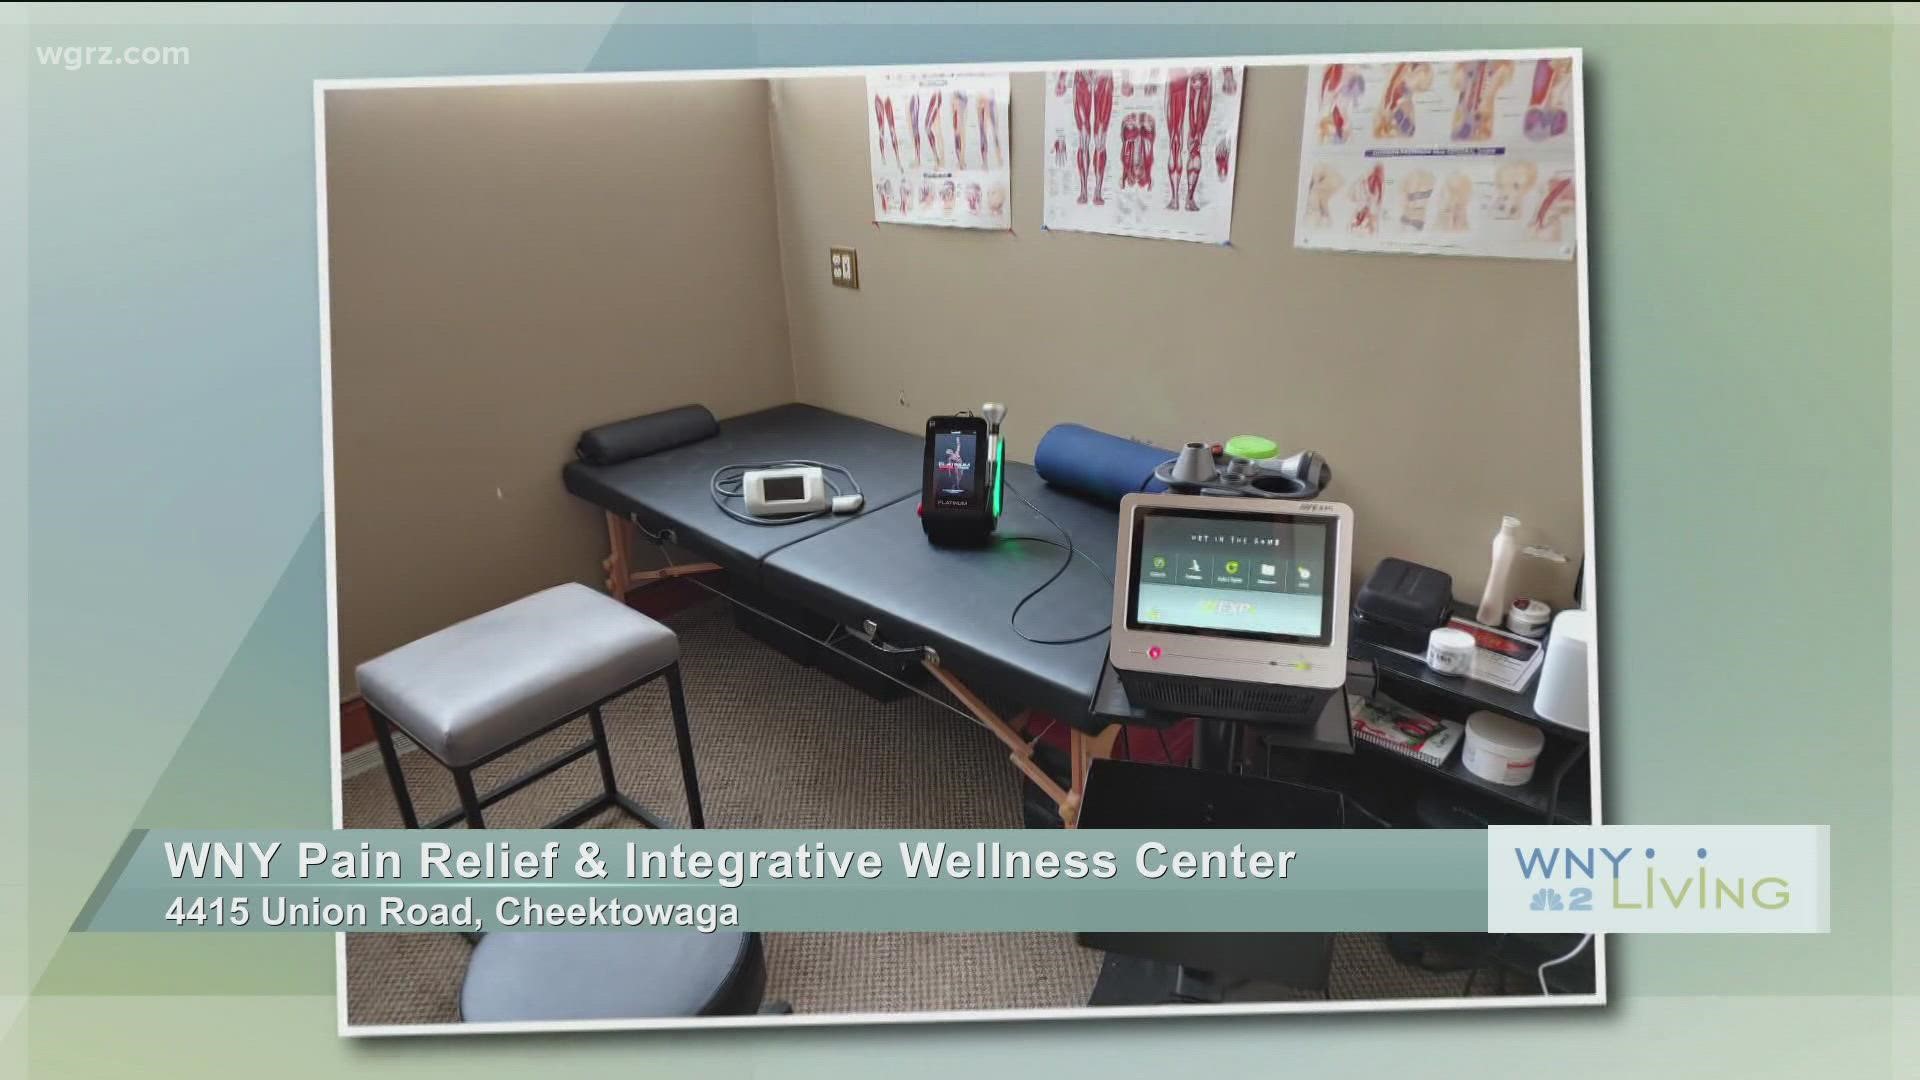 WNY Living - March 12 - WNY Pain Relief & Integrative Wellness Center (THIS VIDEO IS SPONSORED BY WNY PAIN RELIEF & INTEGRATIVE WELLNESS CENTER)